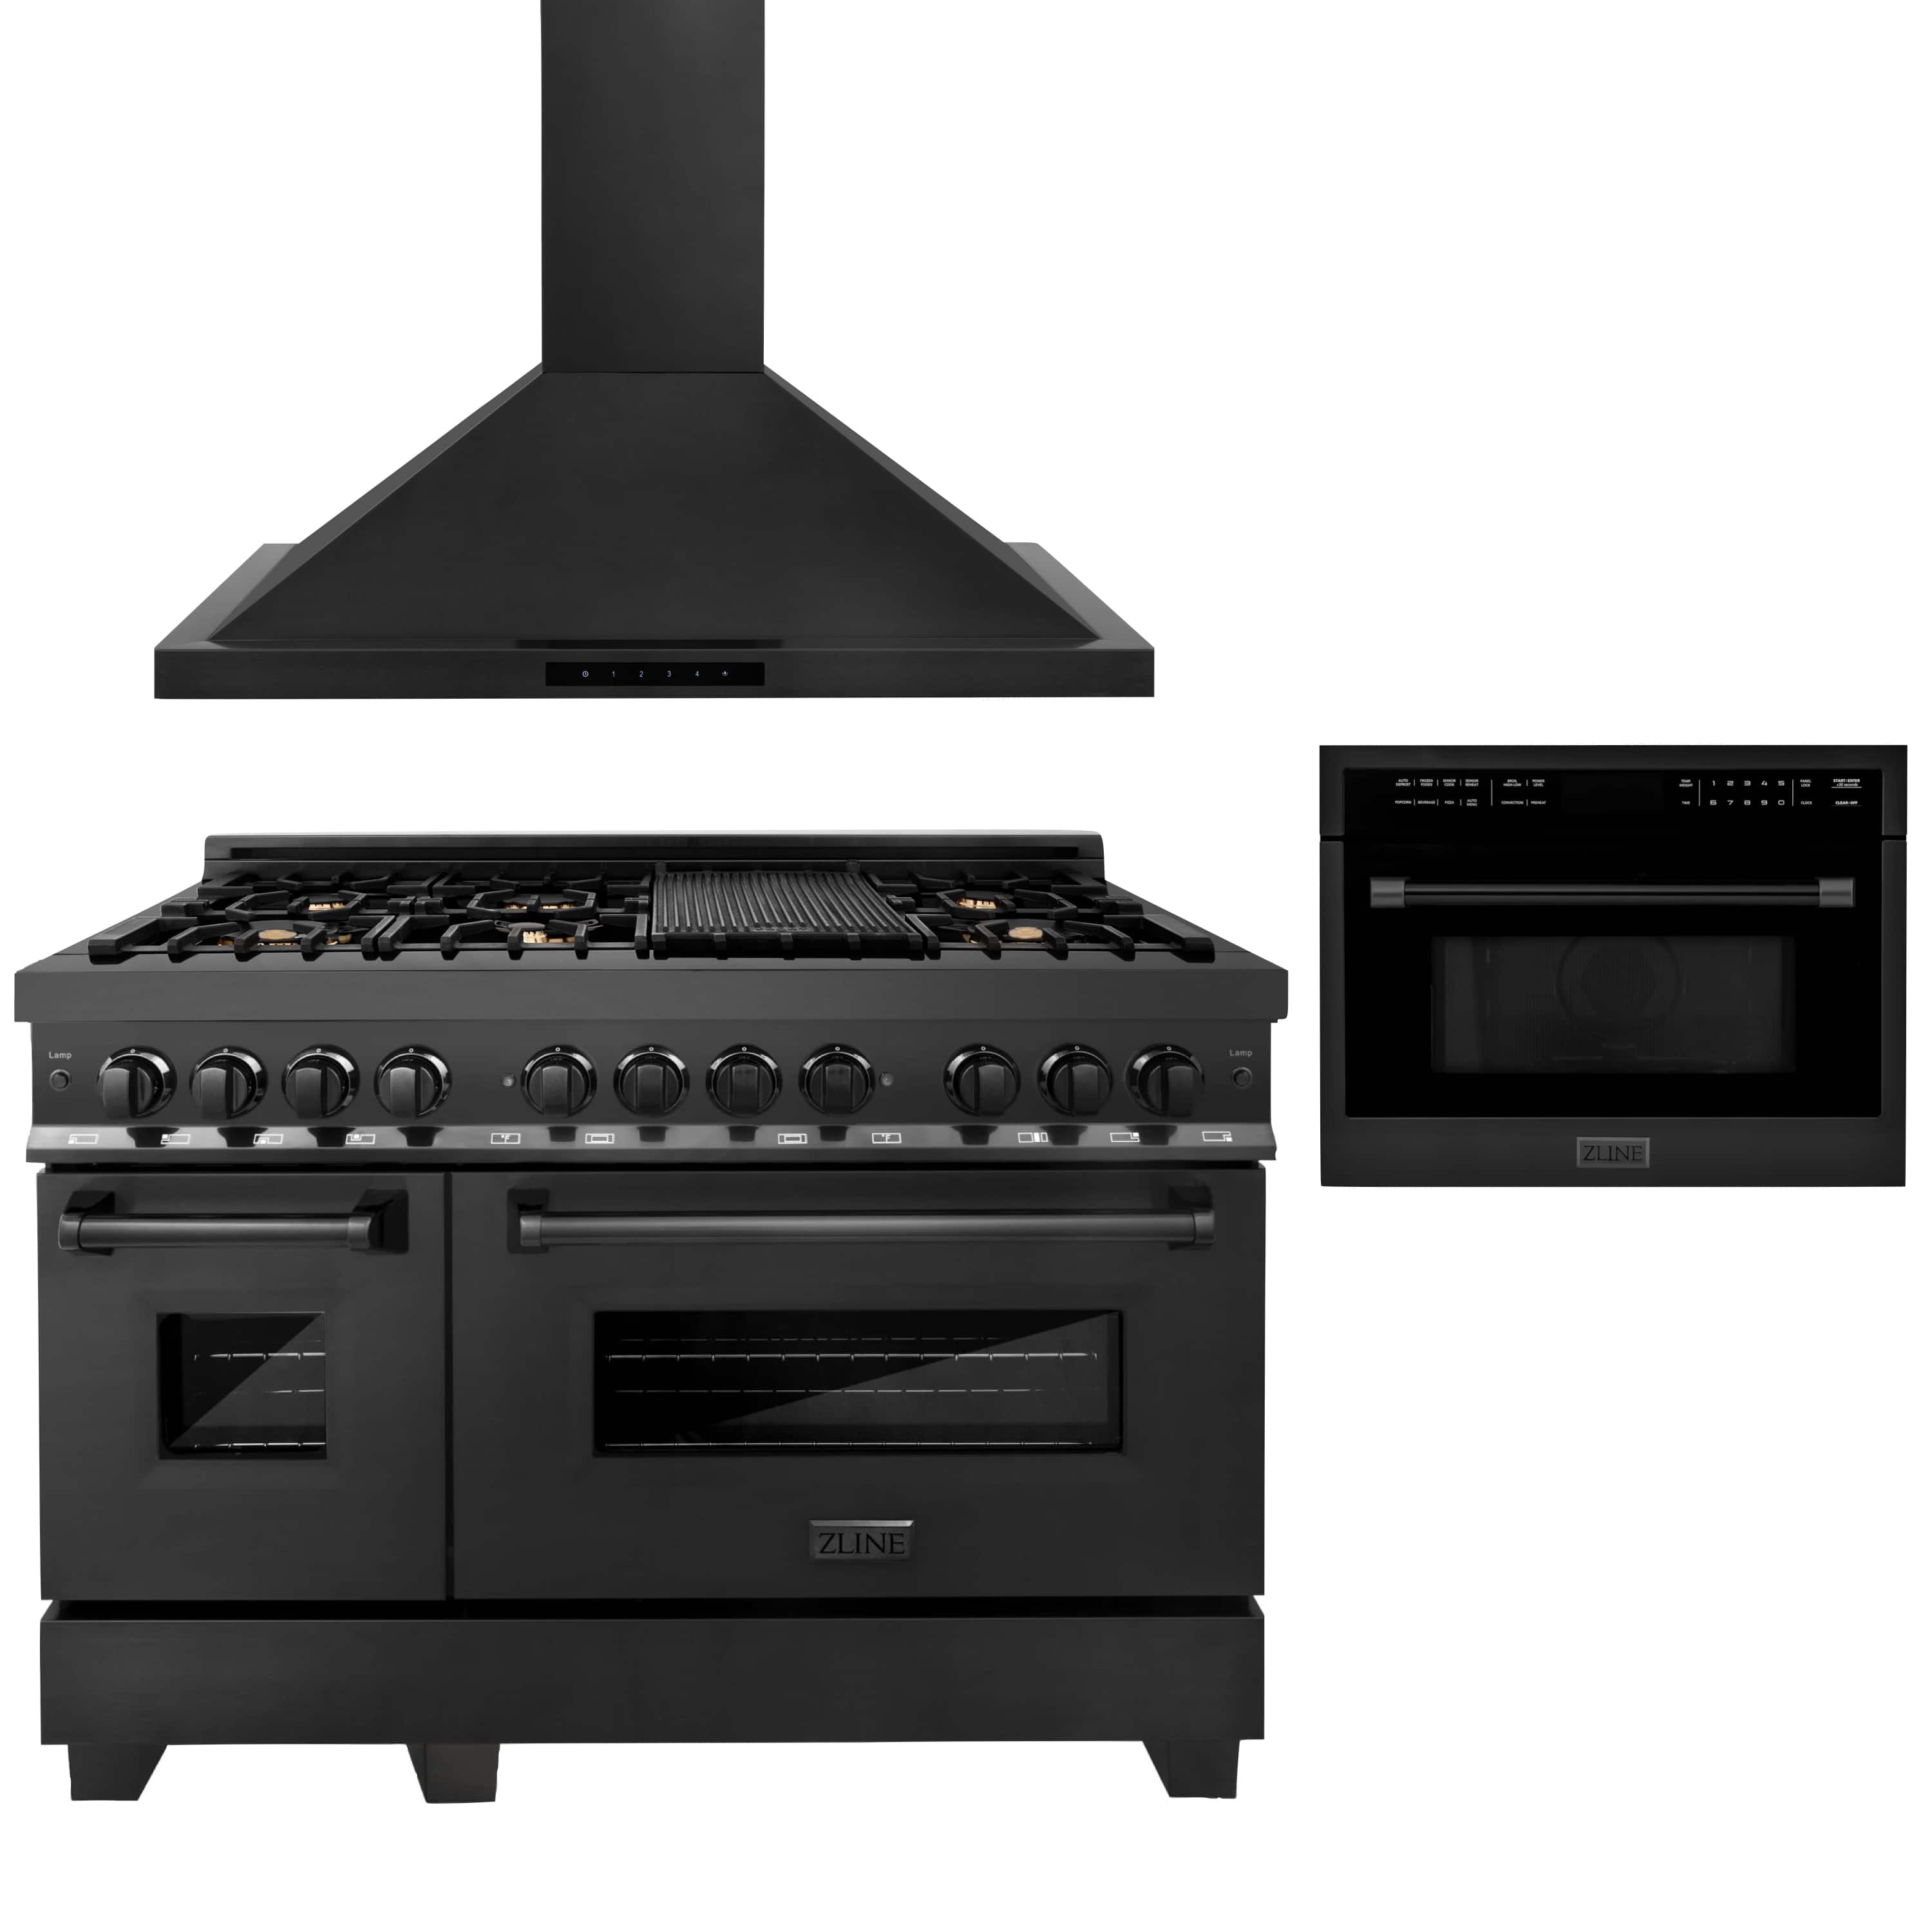 ZLINE 3-Piece Appliance Package - 48-inch Dual Fuel Range with Brass Burners, 24-inch Microwave Oven & Convertible Wall Mount Range Hood in Black Stainless Steel (3KP-RABRHMWO-48)